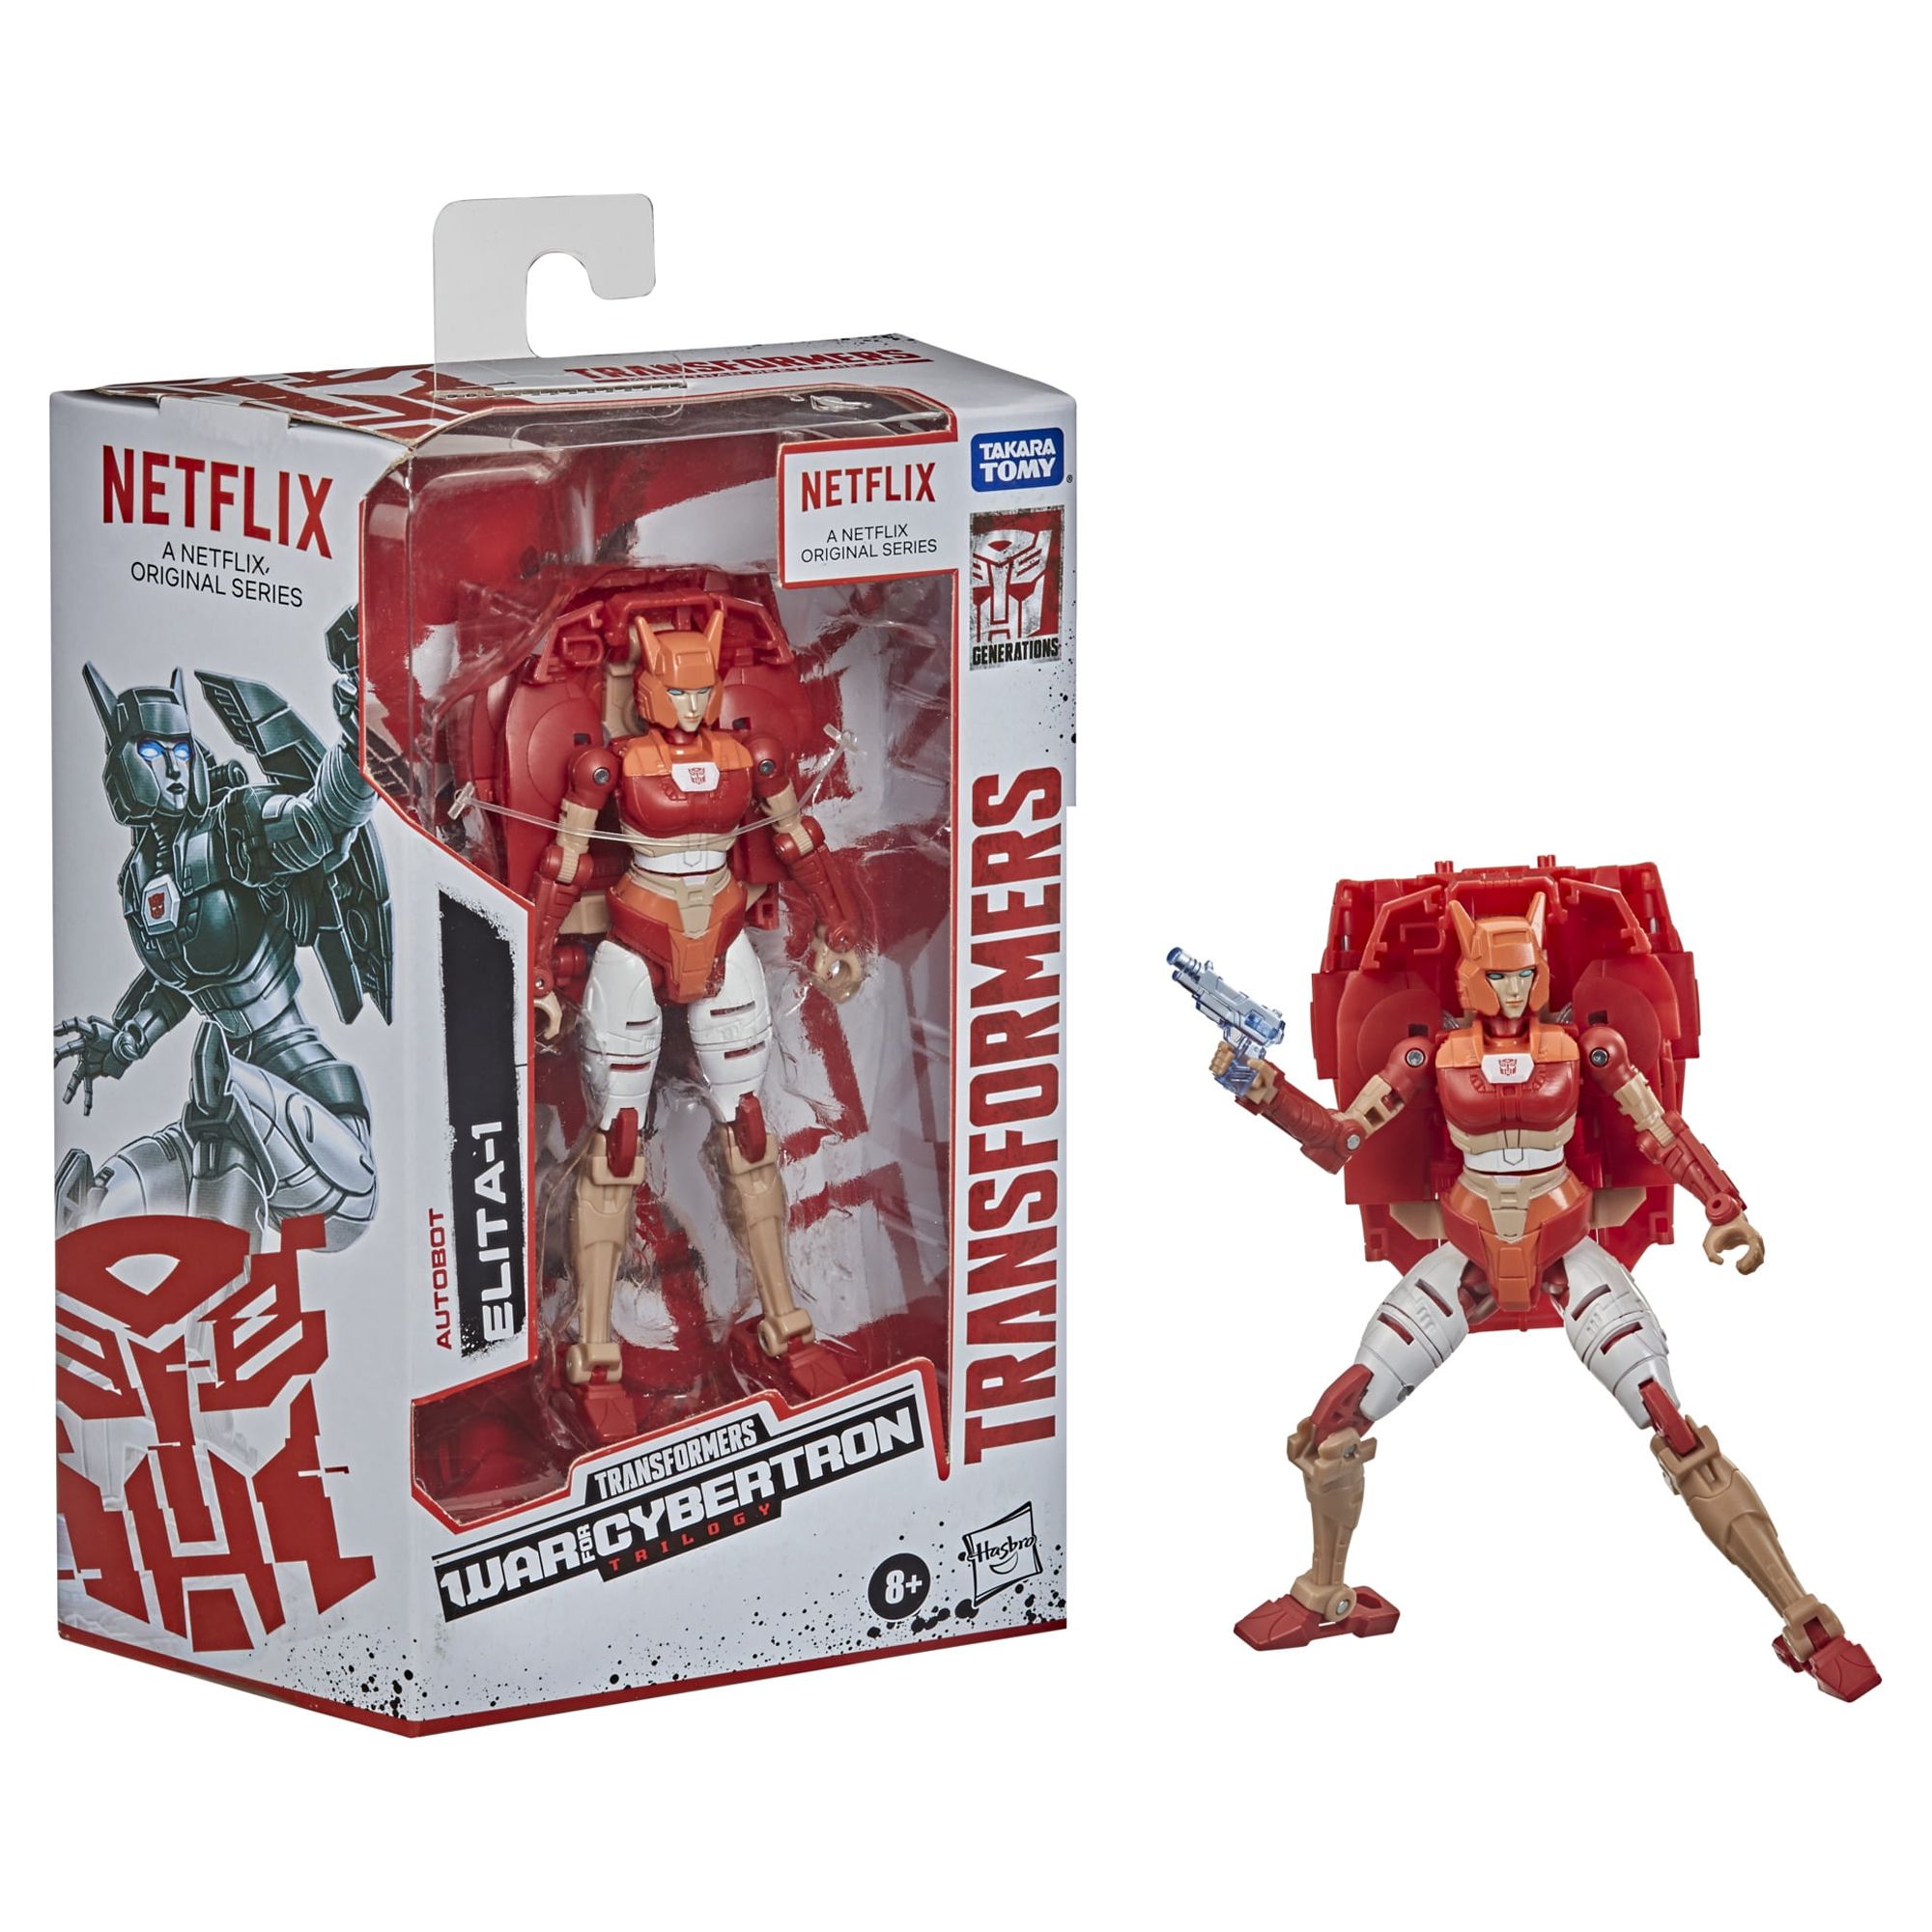 Transformers: War for Cybertron Autobot Elita 1 Kids Toy Action Figure for Boys and Girls (6") - image 1 of 5